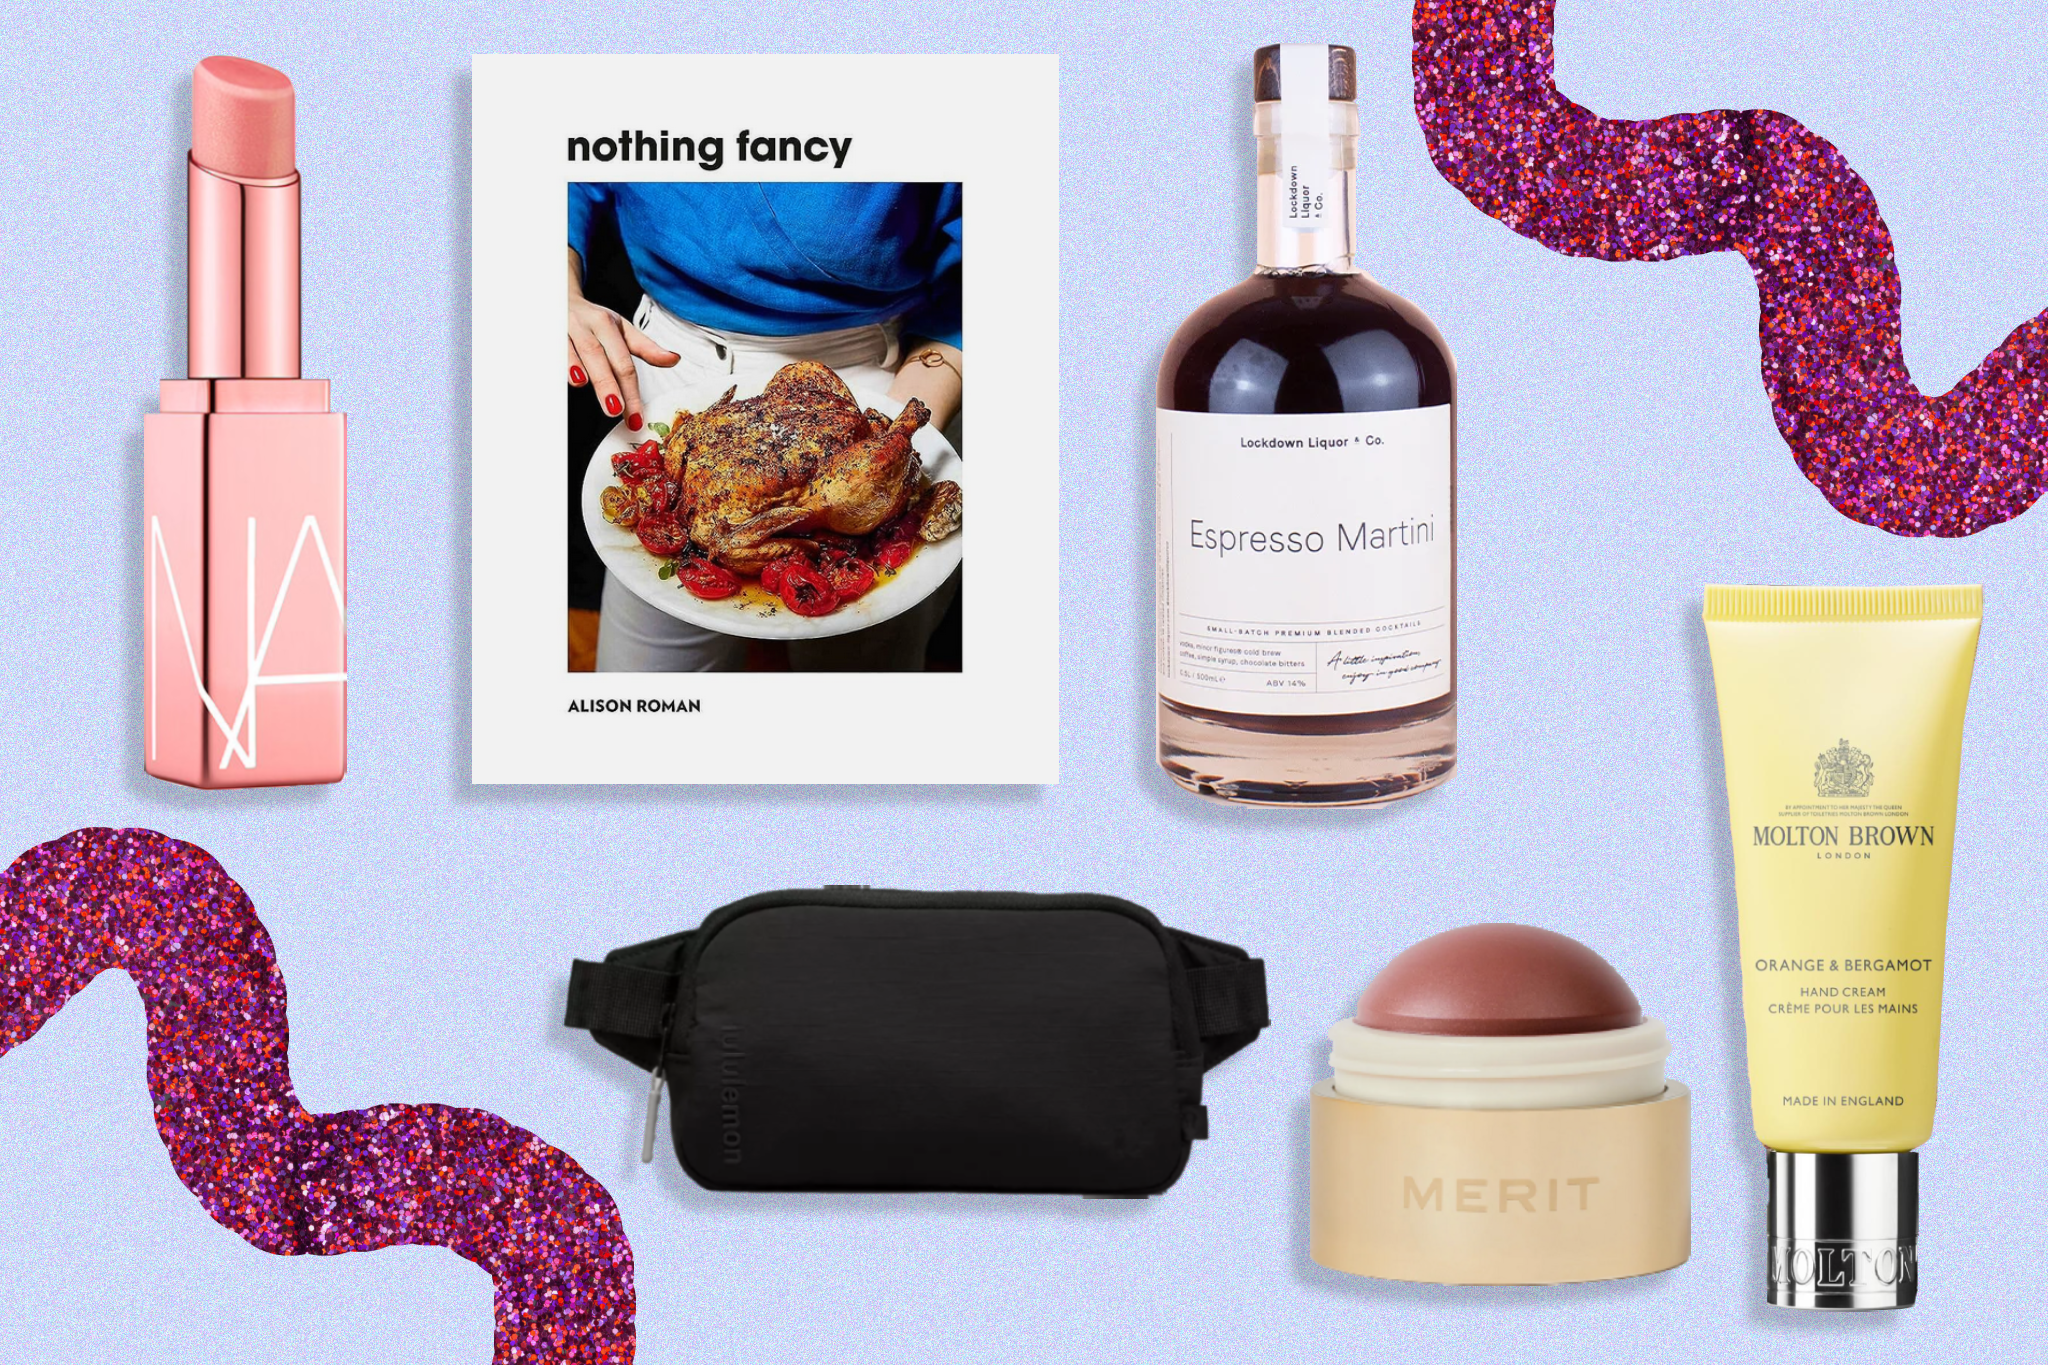 30 Gifts for Women That They Will Love - Happy Money Saver